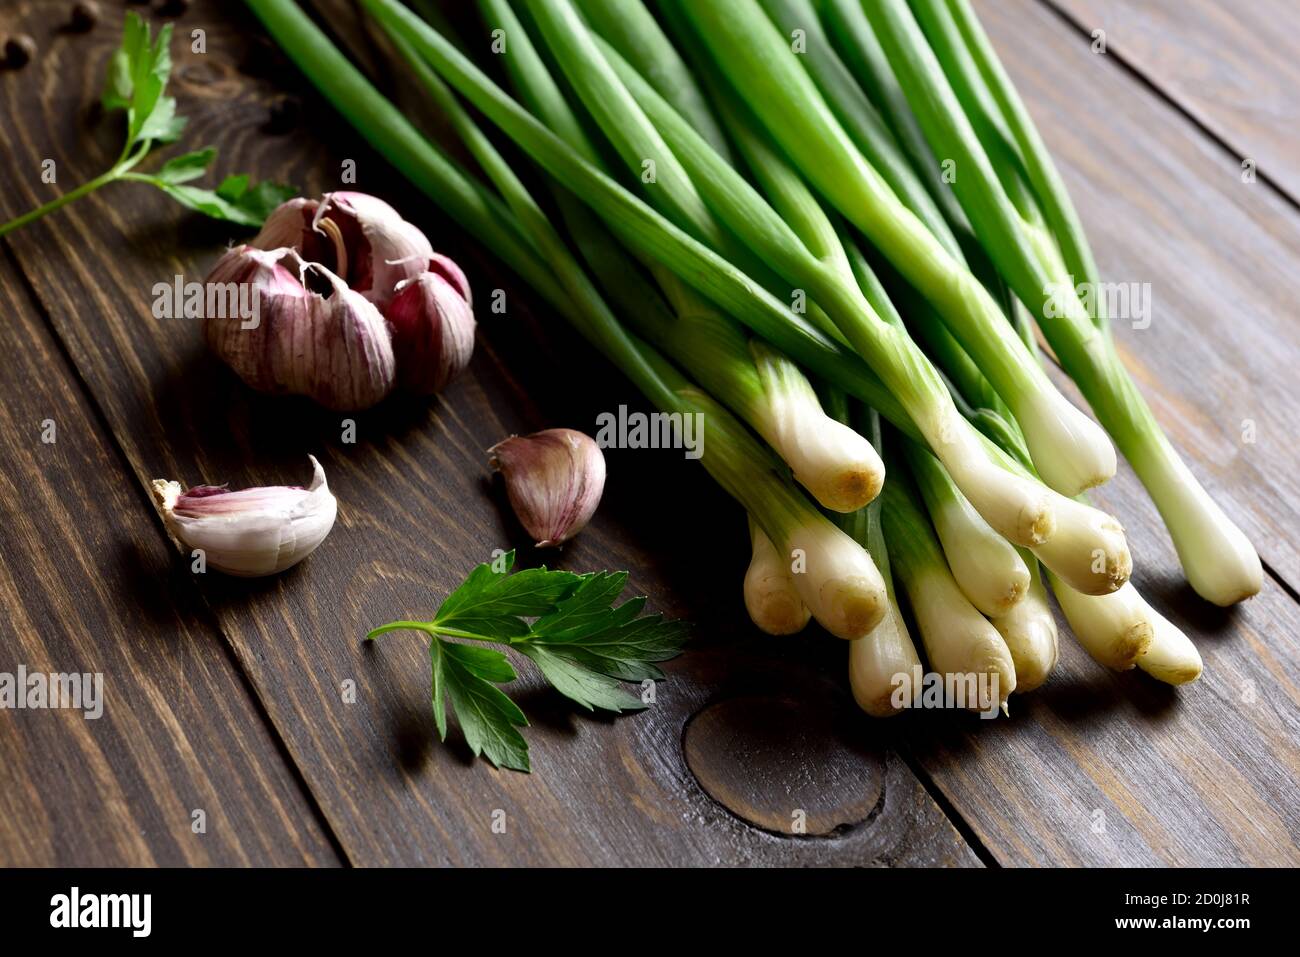 Fresh green onion and garlic on wooden background. Close up view Stock Photo